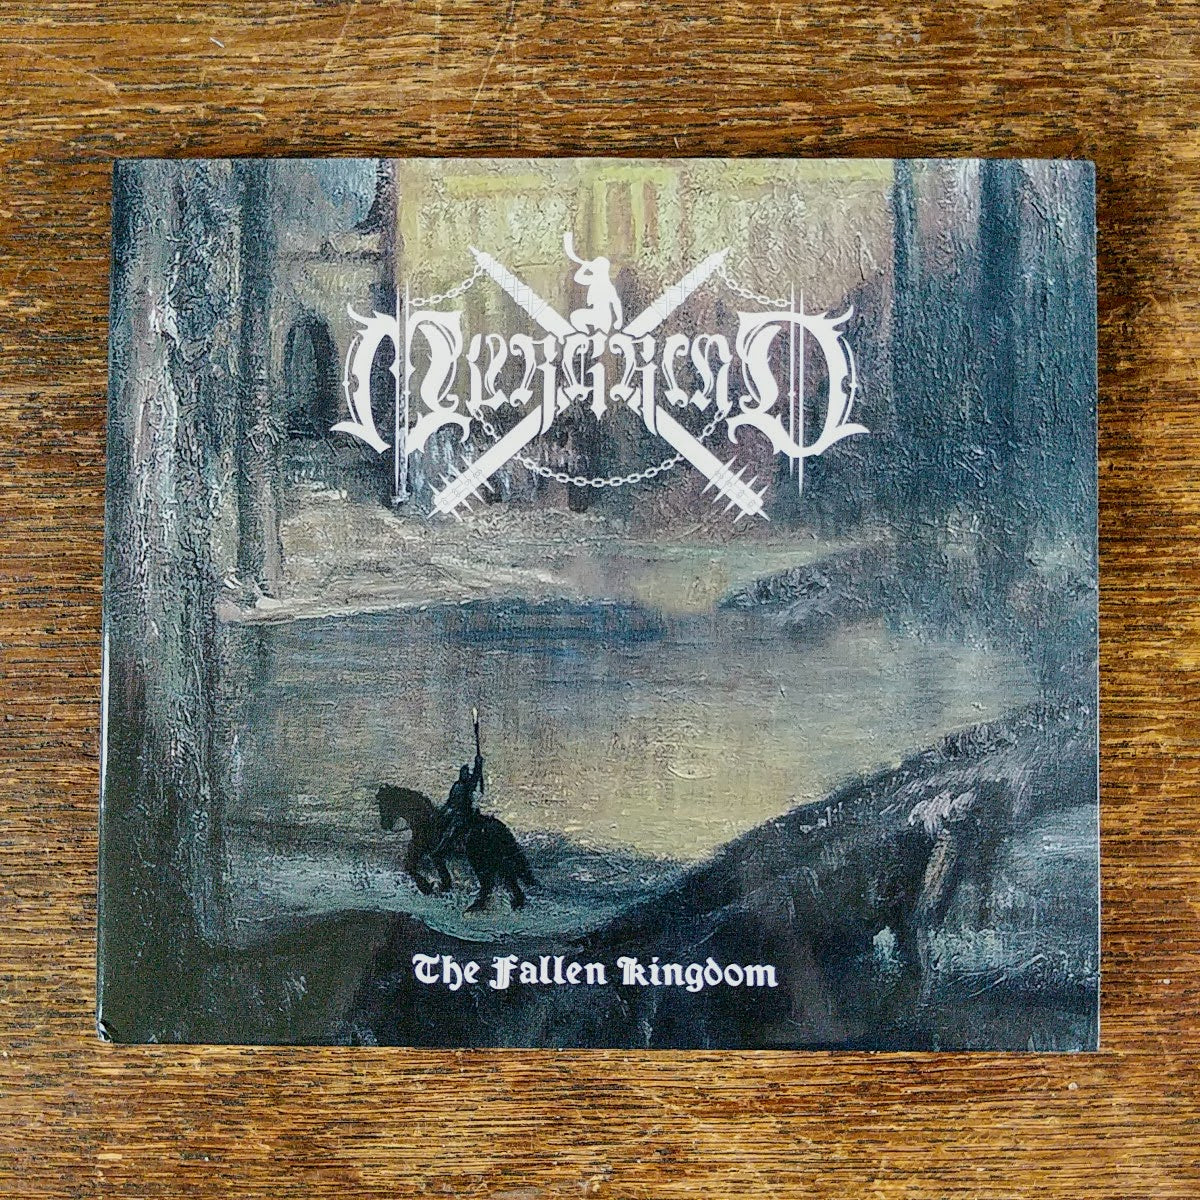 [SOLD OUT] MURGRIND "The Fallen Kingdom" CD (lim.500)